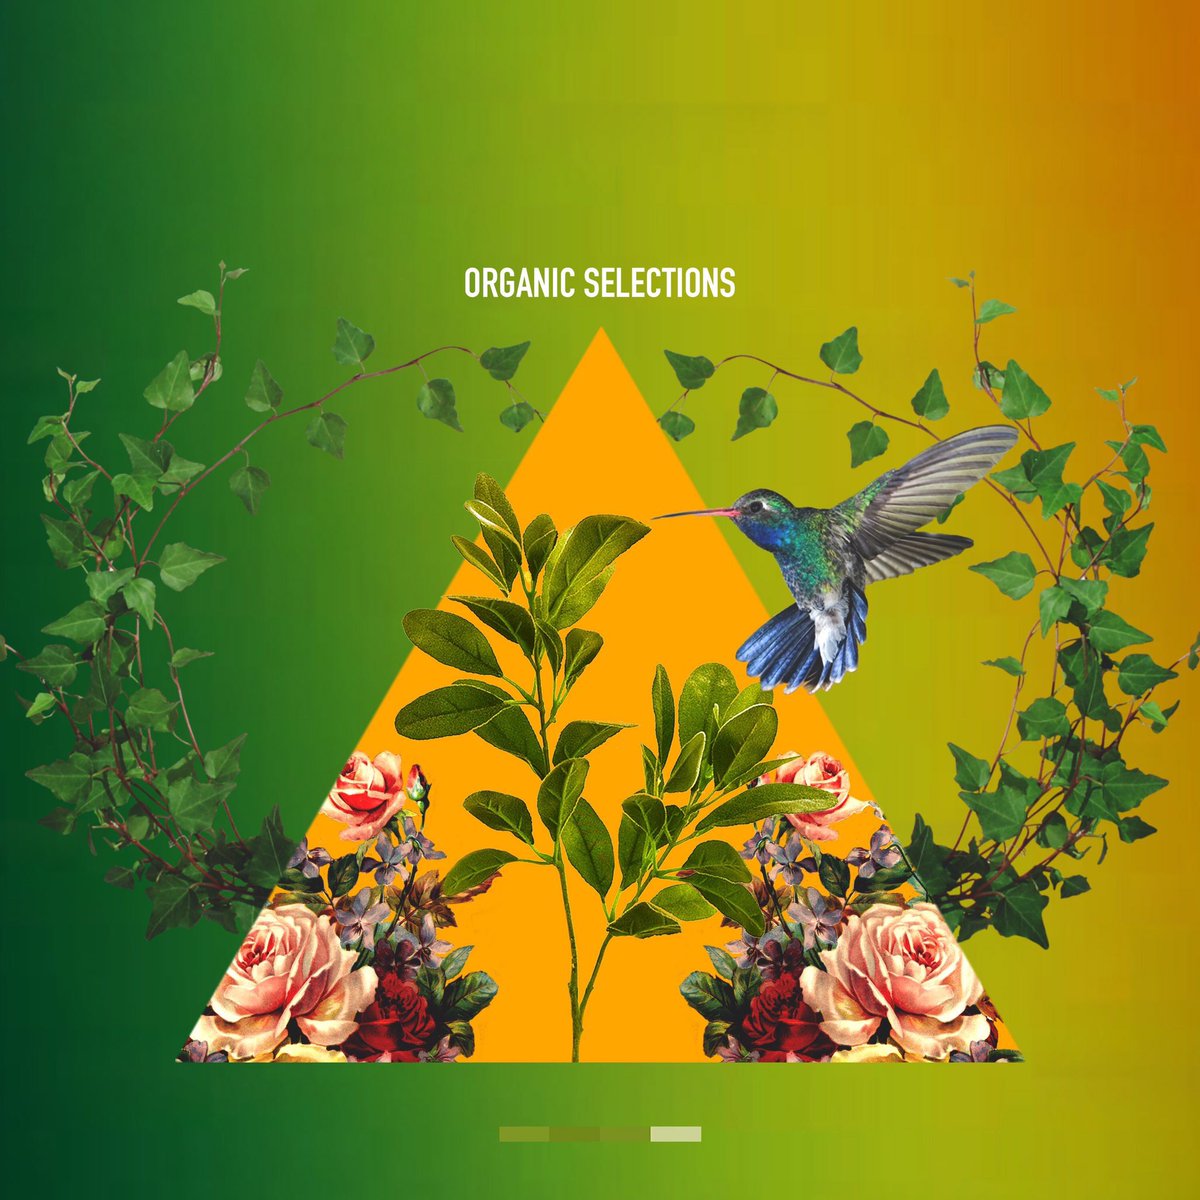 Updated.
Stream #OrganicSelects featuring @ReggieBecton @SouthCentralSev @DOPEITSDOM @rapsody @Official_Tink @inglewoodSiR @JustineSkye @mmacayres @snohaalegra @LoveAlexIsley @LilSnickerfoot @LarryJuneTFM & more.

Available on @AppleMusic & @Spotify
smarturl.it/organicselects